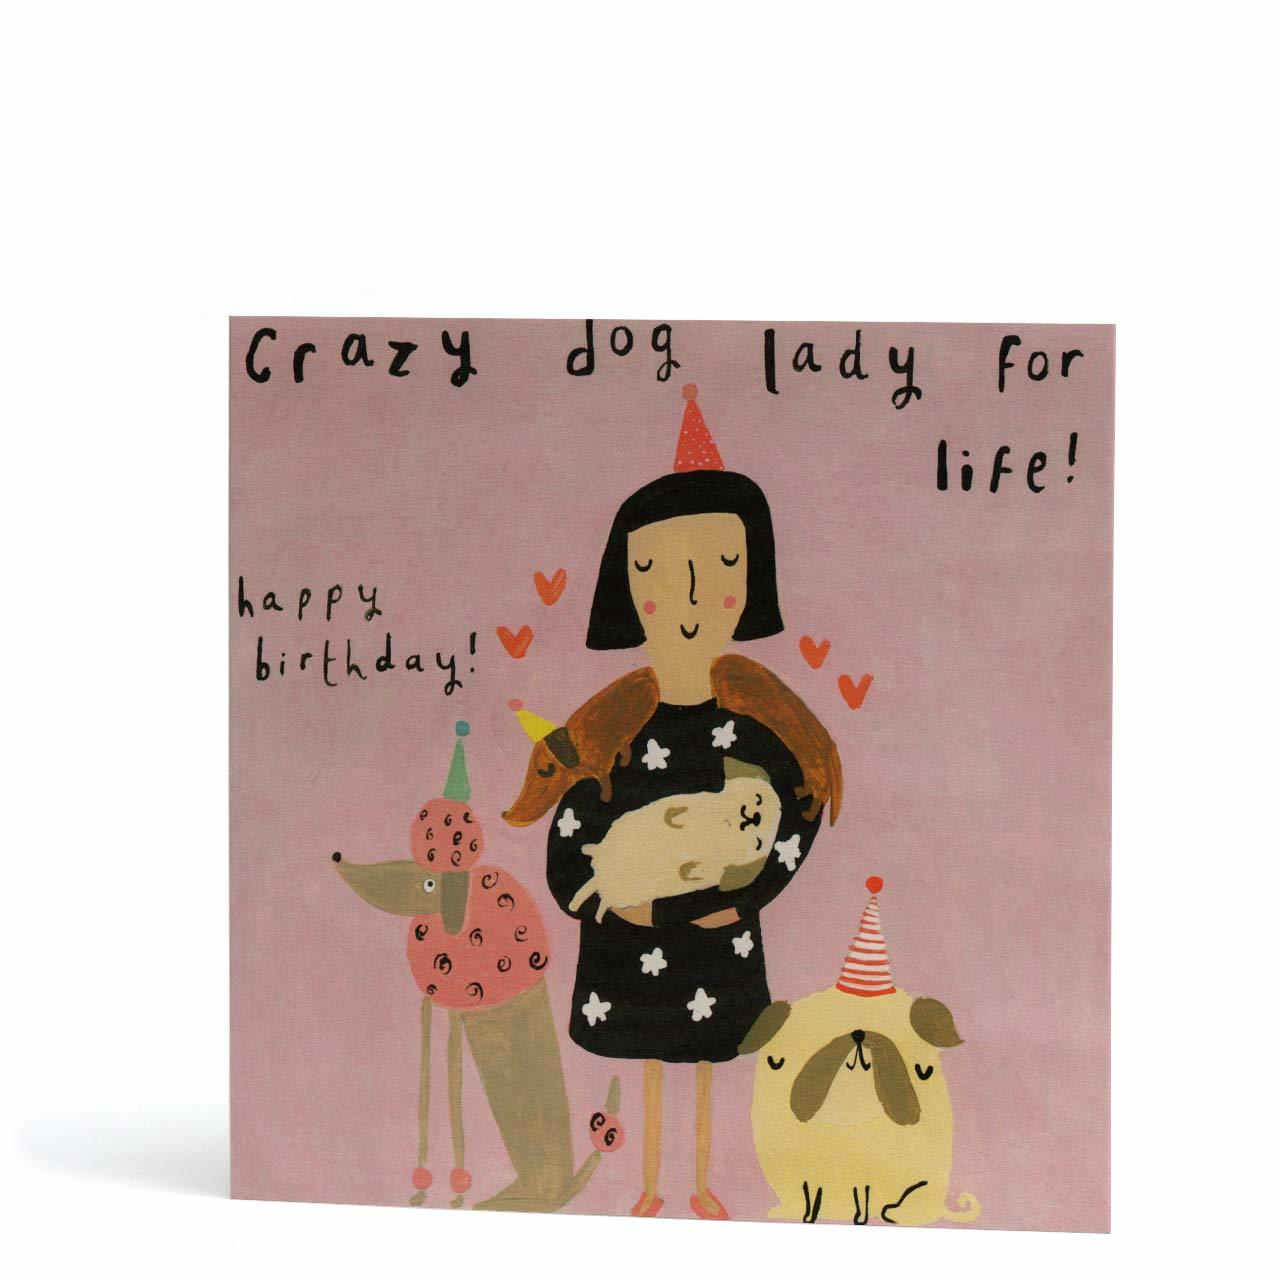 Crazy Dog Lady for Life Greeting Card